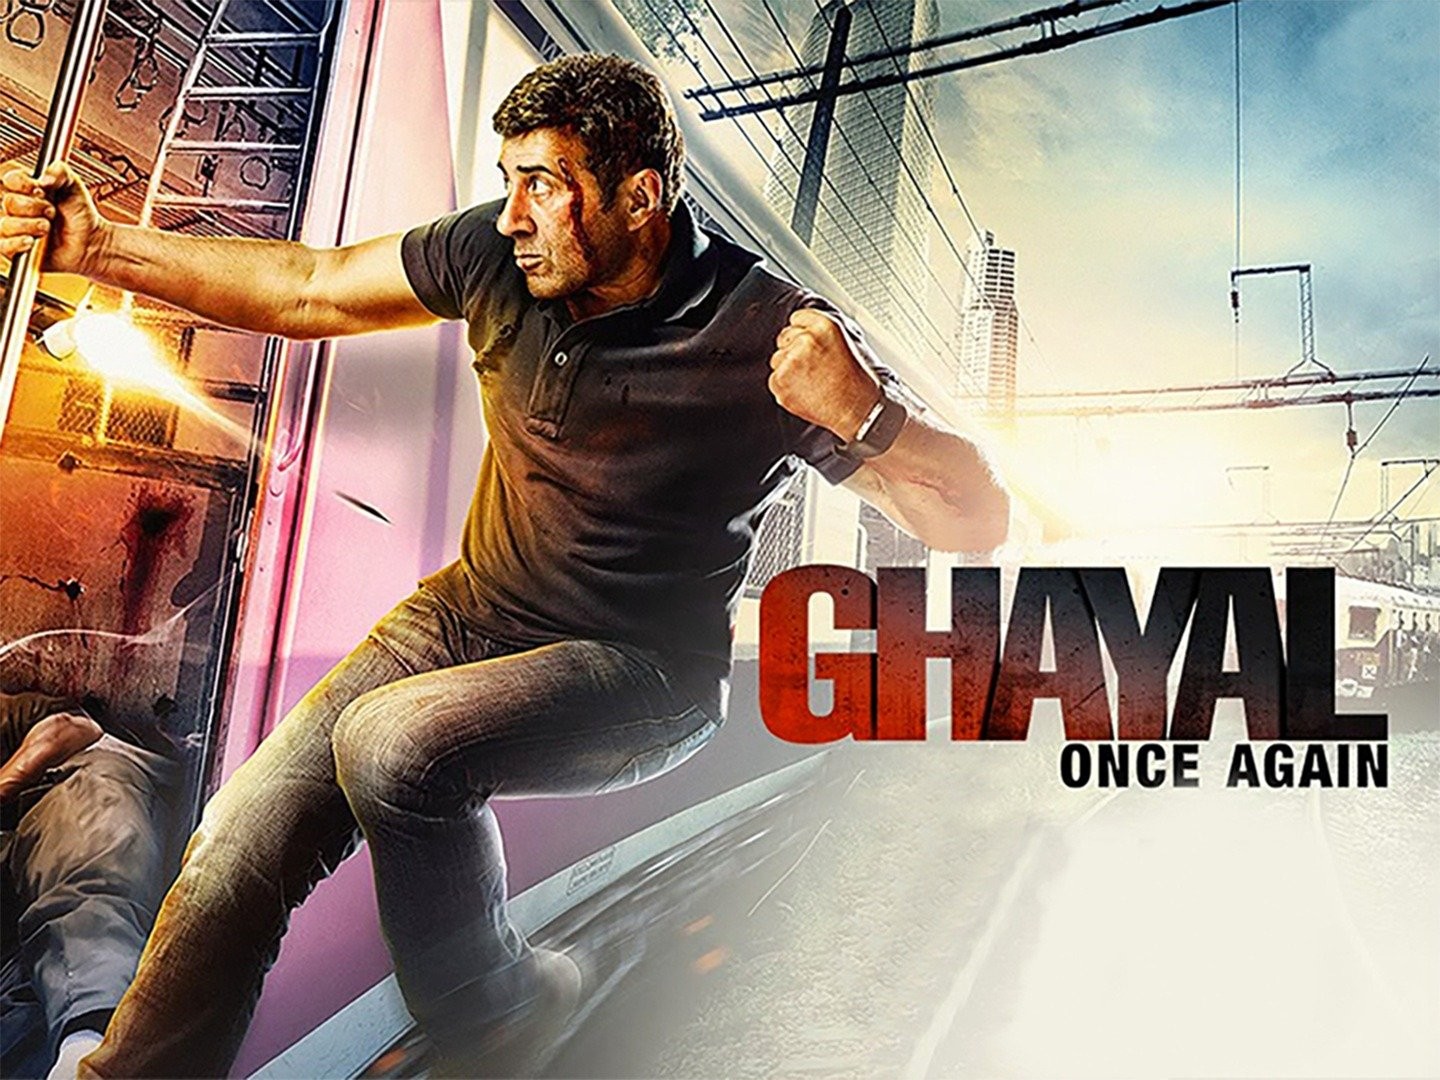 Ghayal Once Again Review